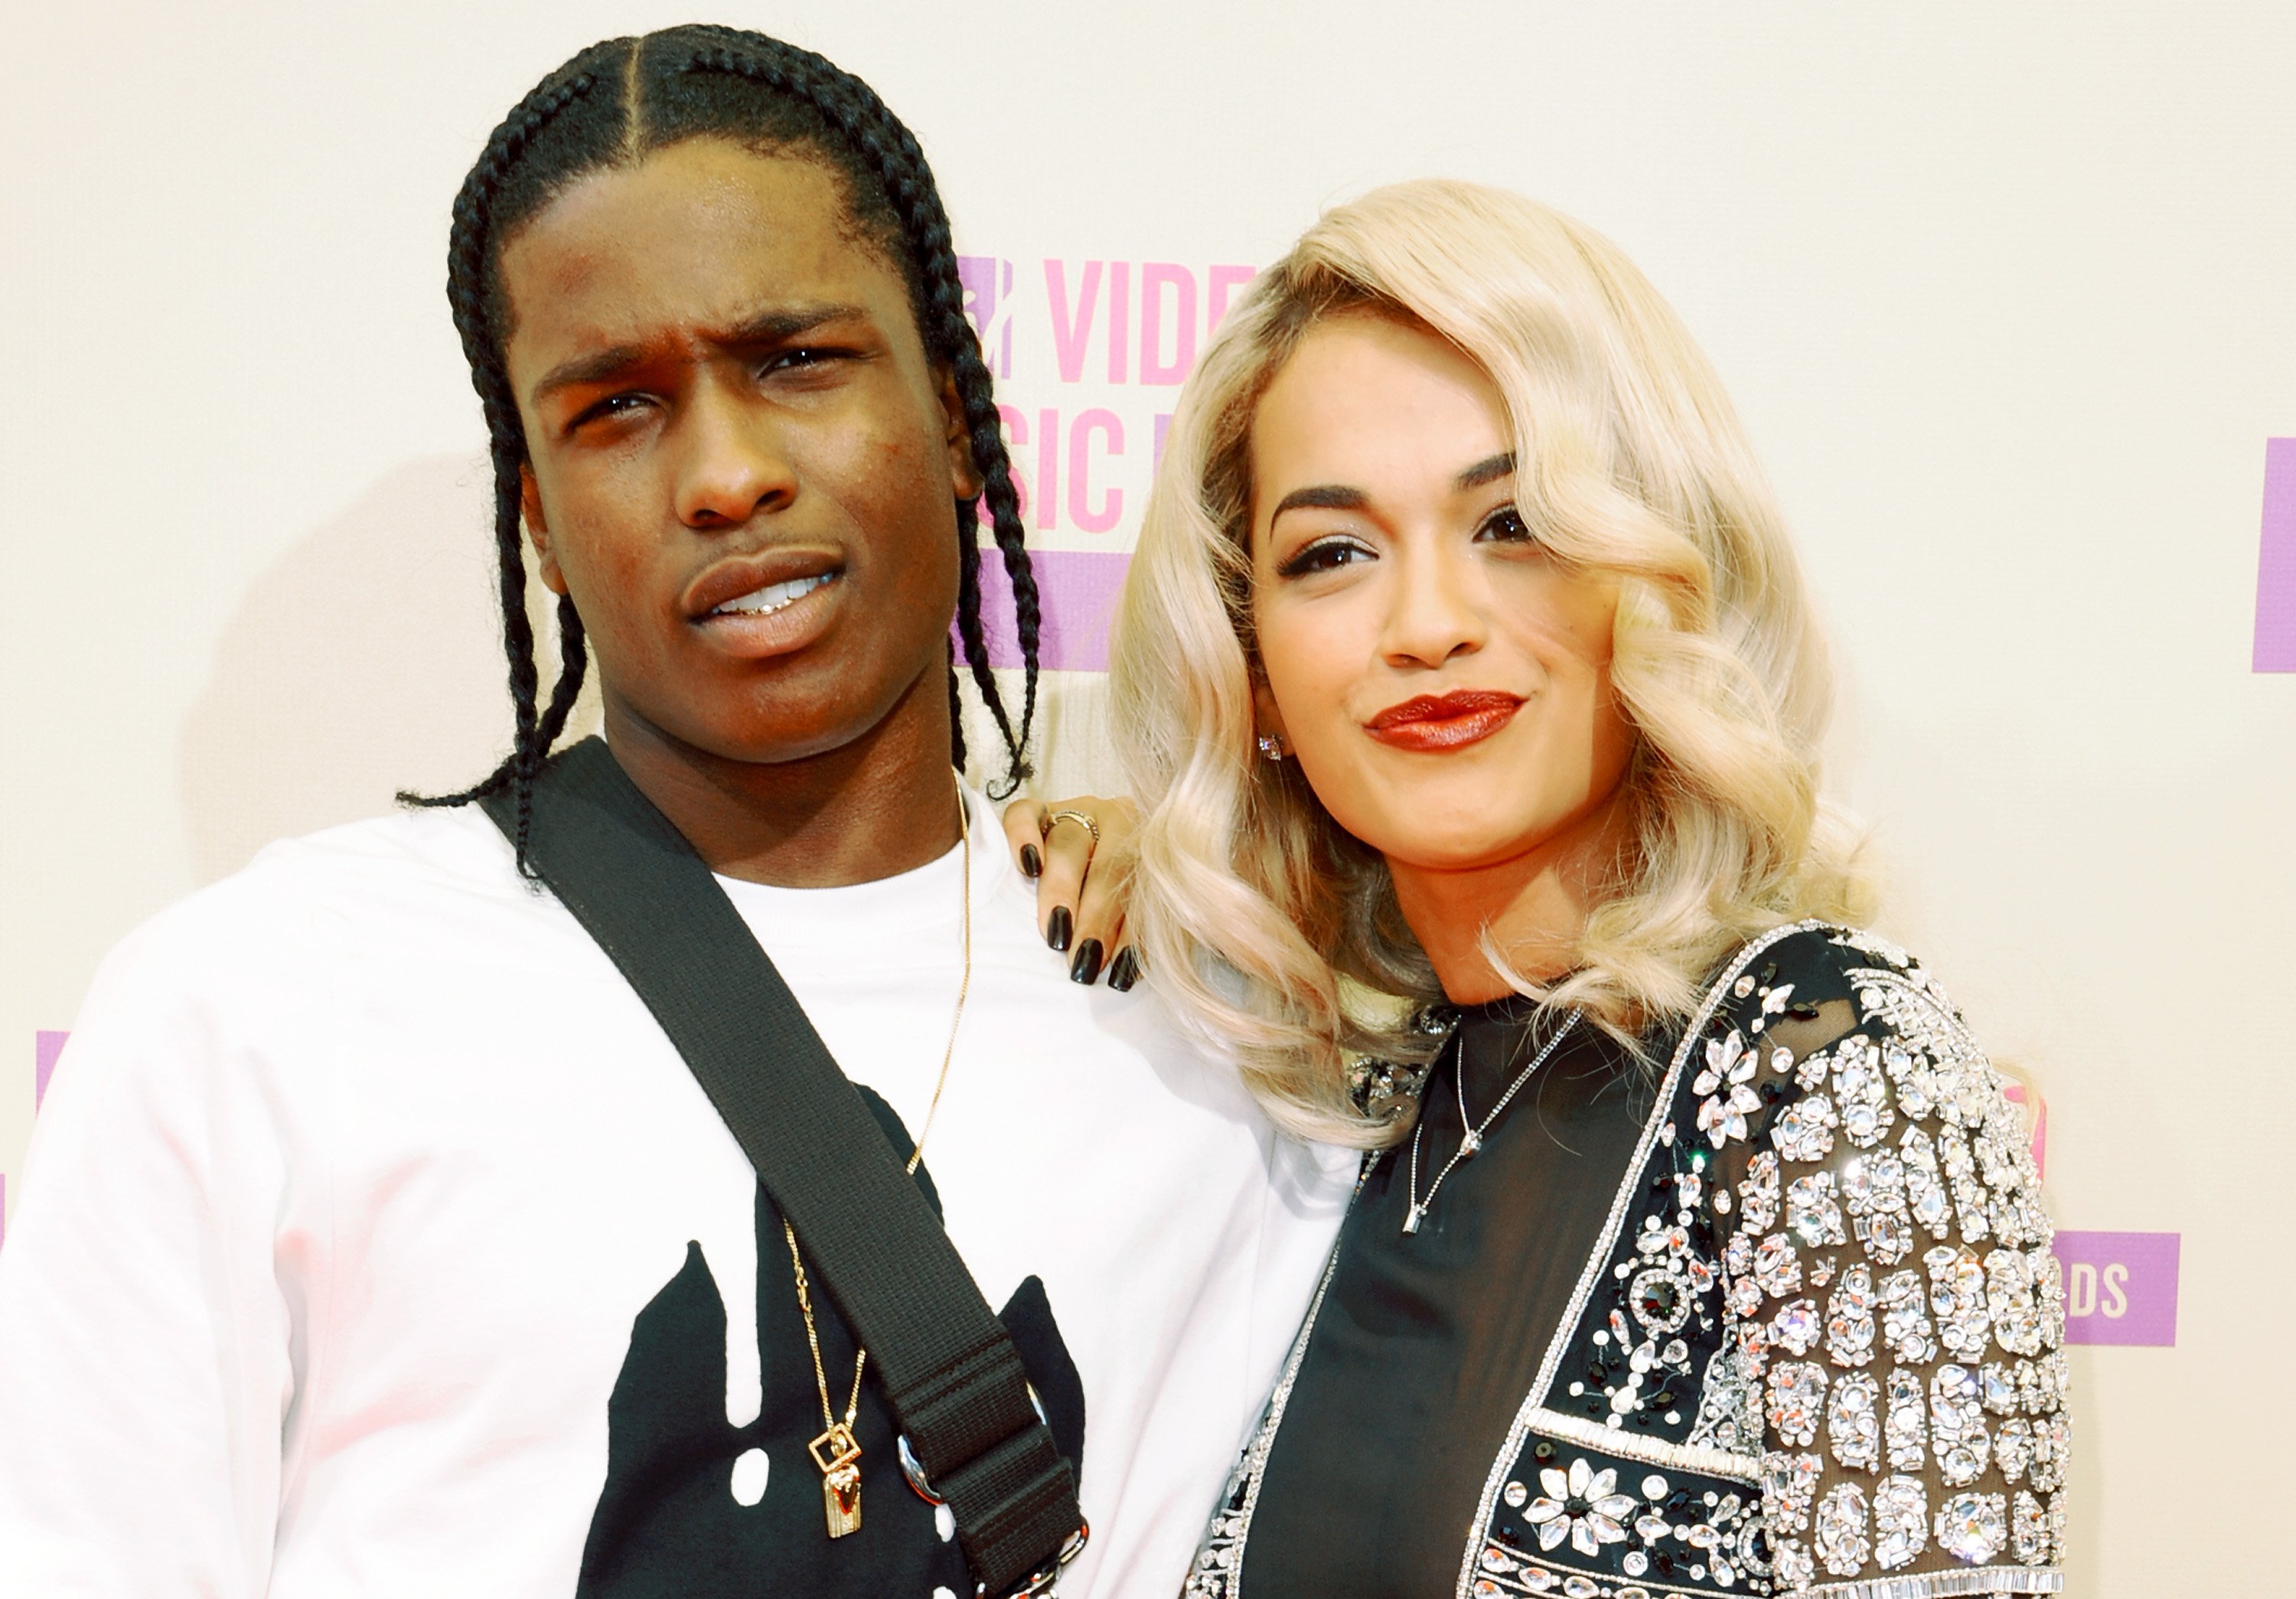 A$AP Rocky and Rita Ora at the 2012 MTV Video Music Awards on September 6, 2012 | Source: Getty Images